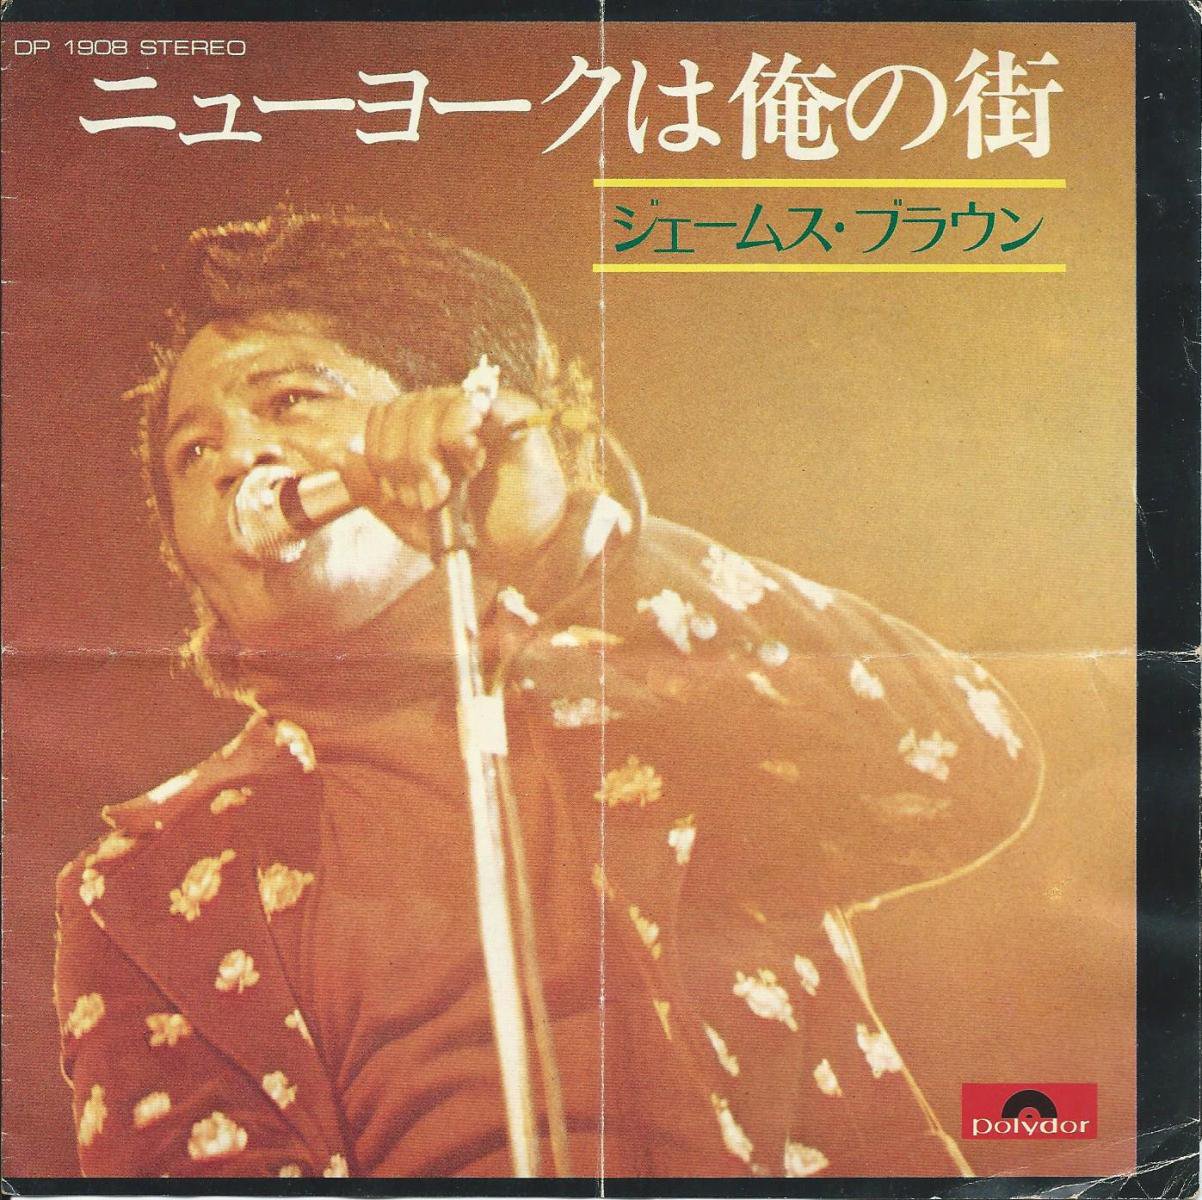 ॹ֥饦 JAMES BROWN / ˥塼衼ϲγ DOWN AND OUT IN NEW YORK (7